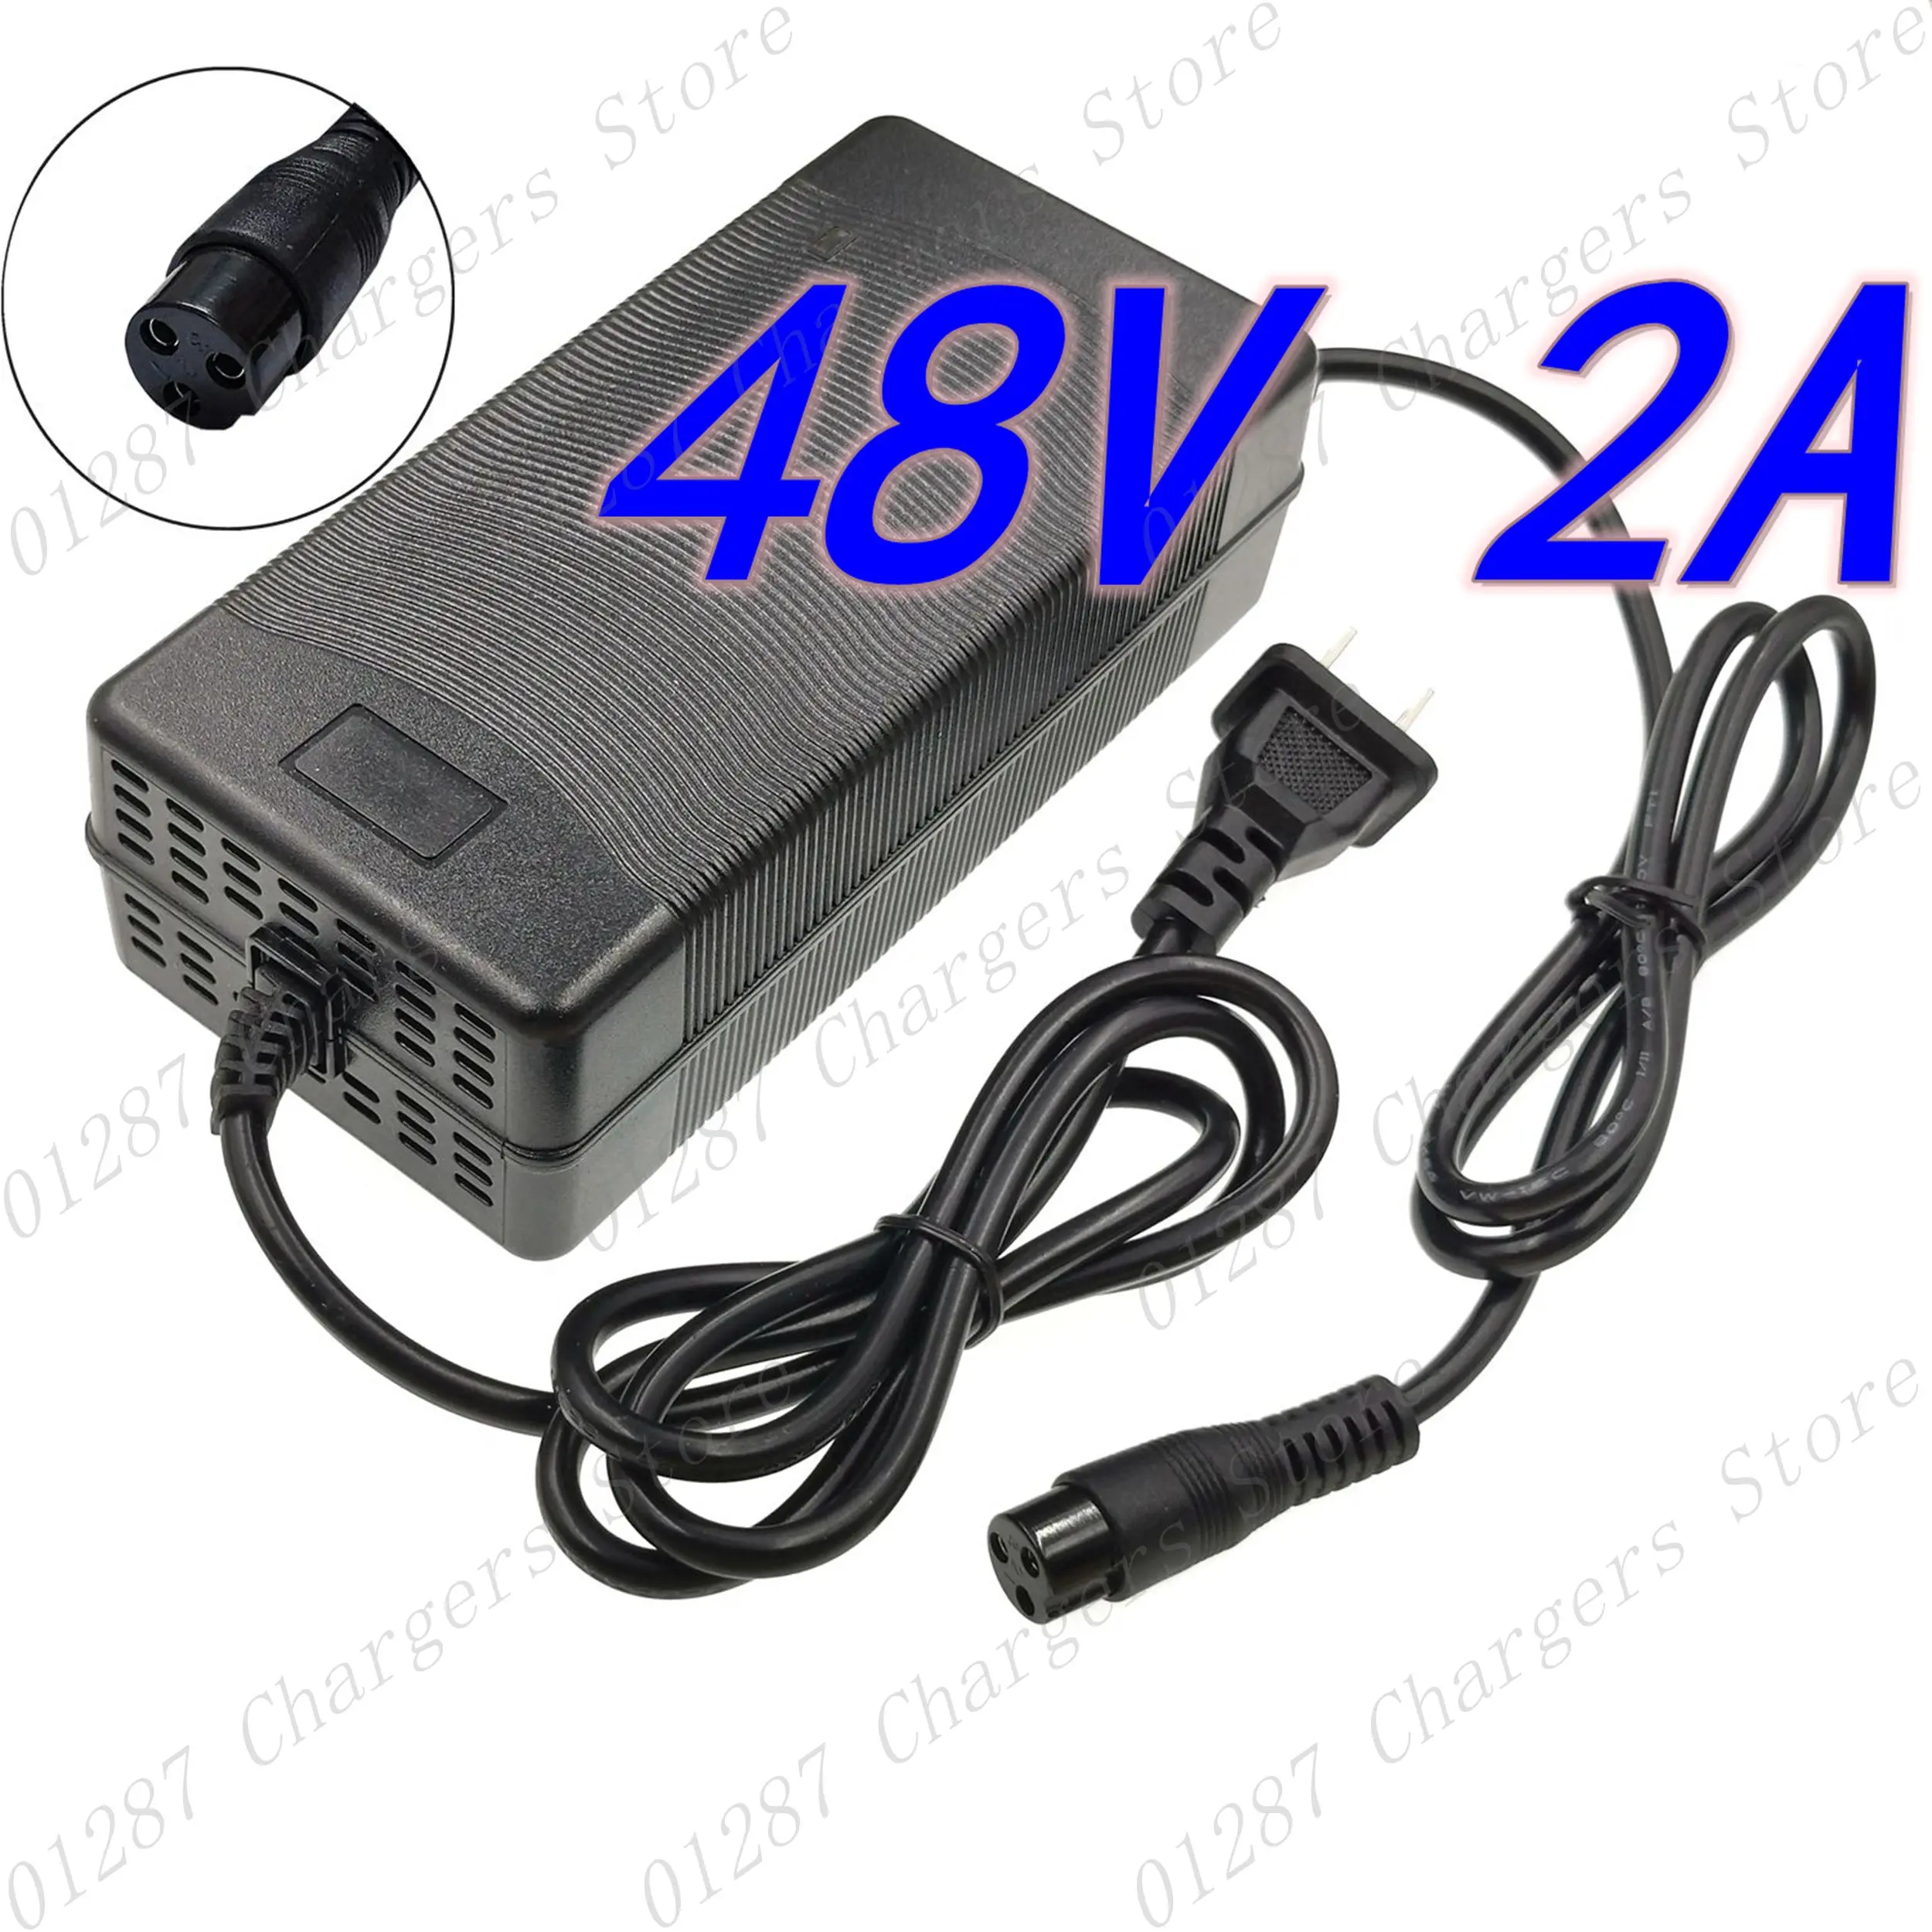 

48V 2A Lead acid Battery Charger for 57.6V Lead acid Battery Electric Bicycle Bike Scooters Motorcycle Charger 3P GX16 Plug